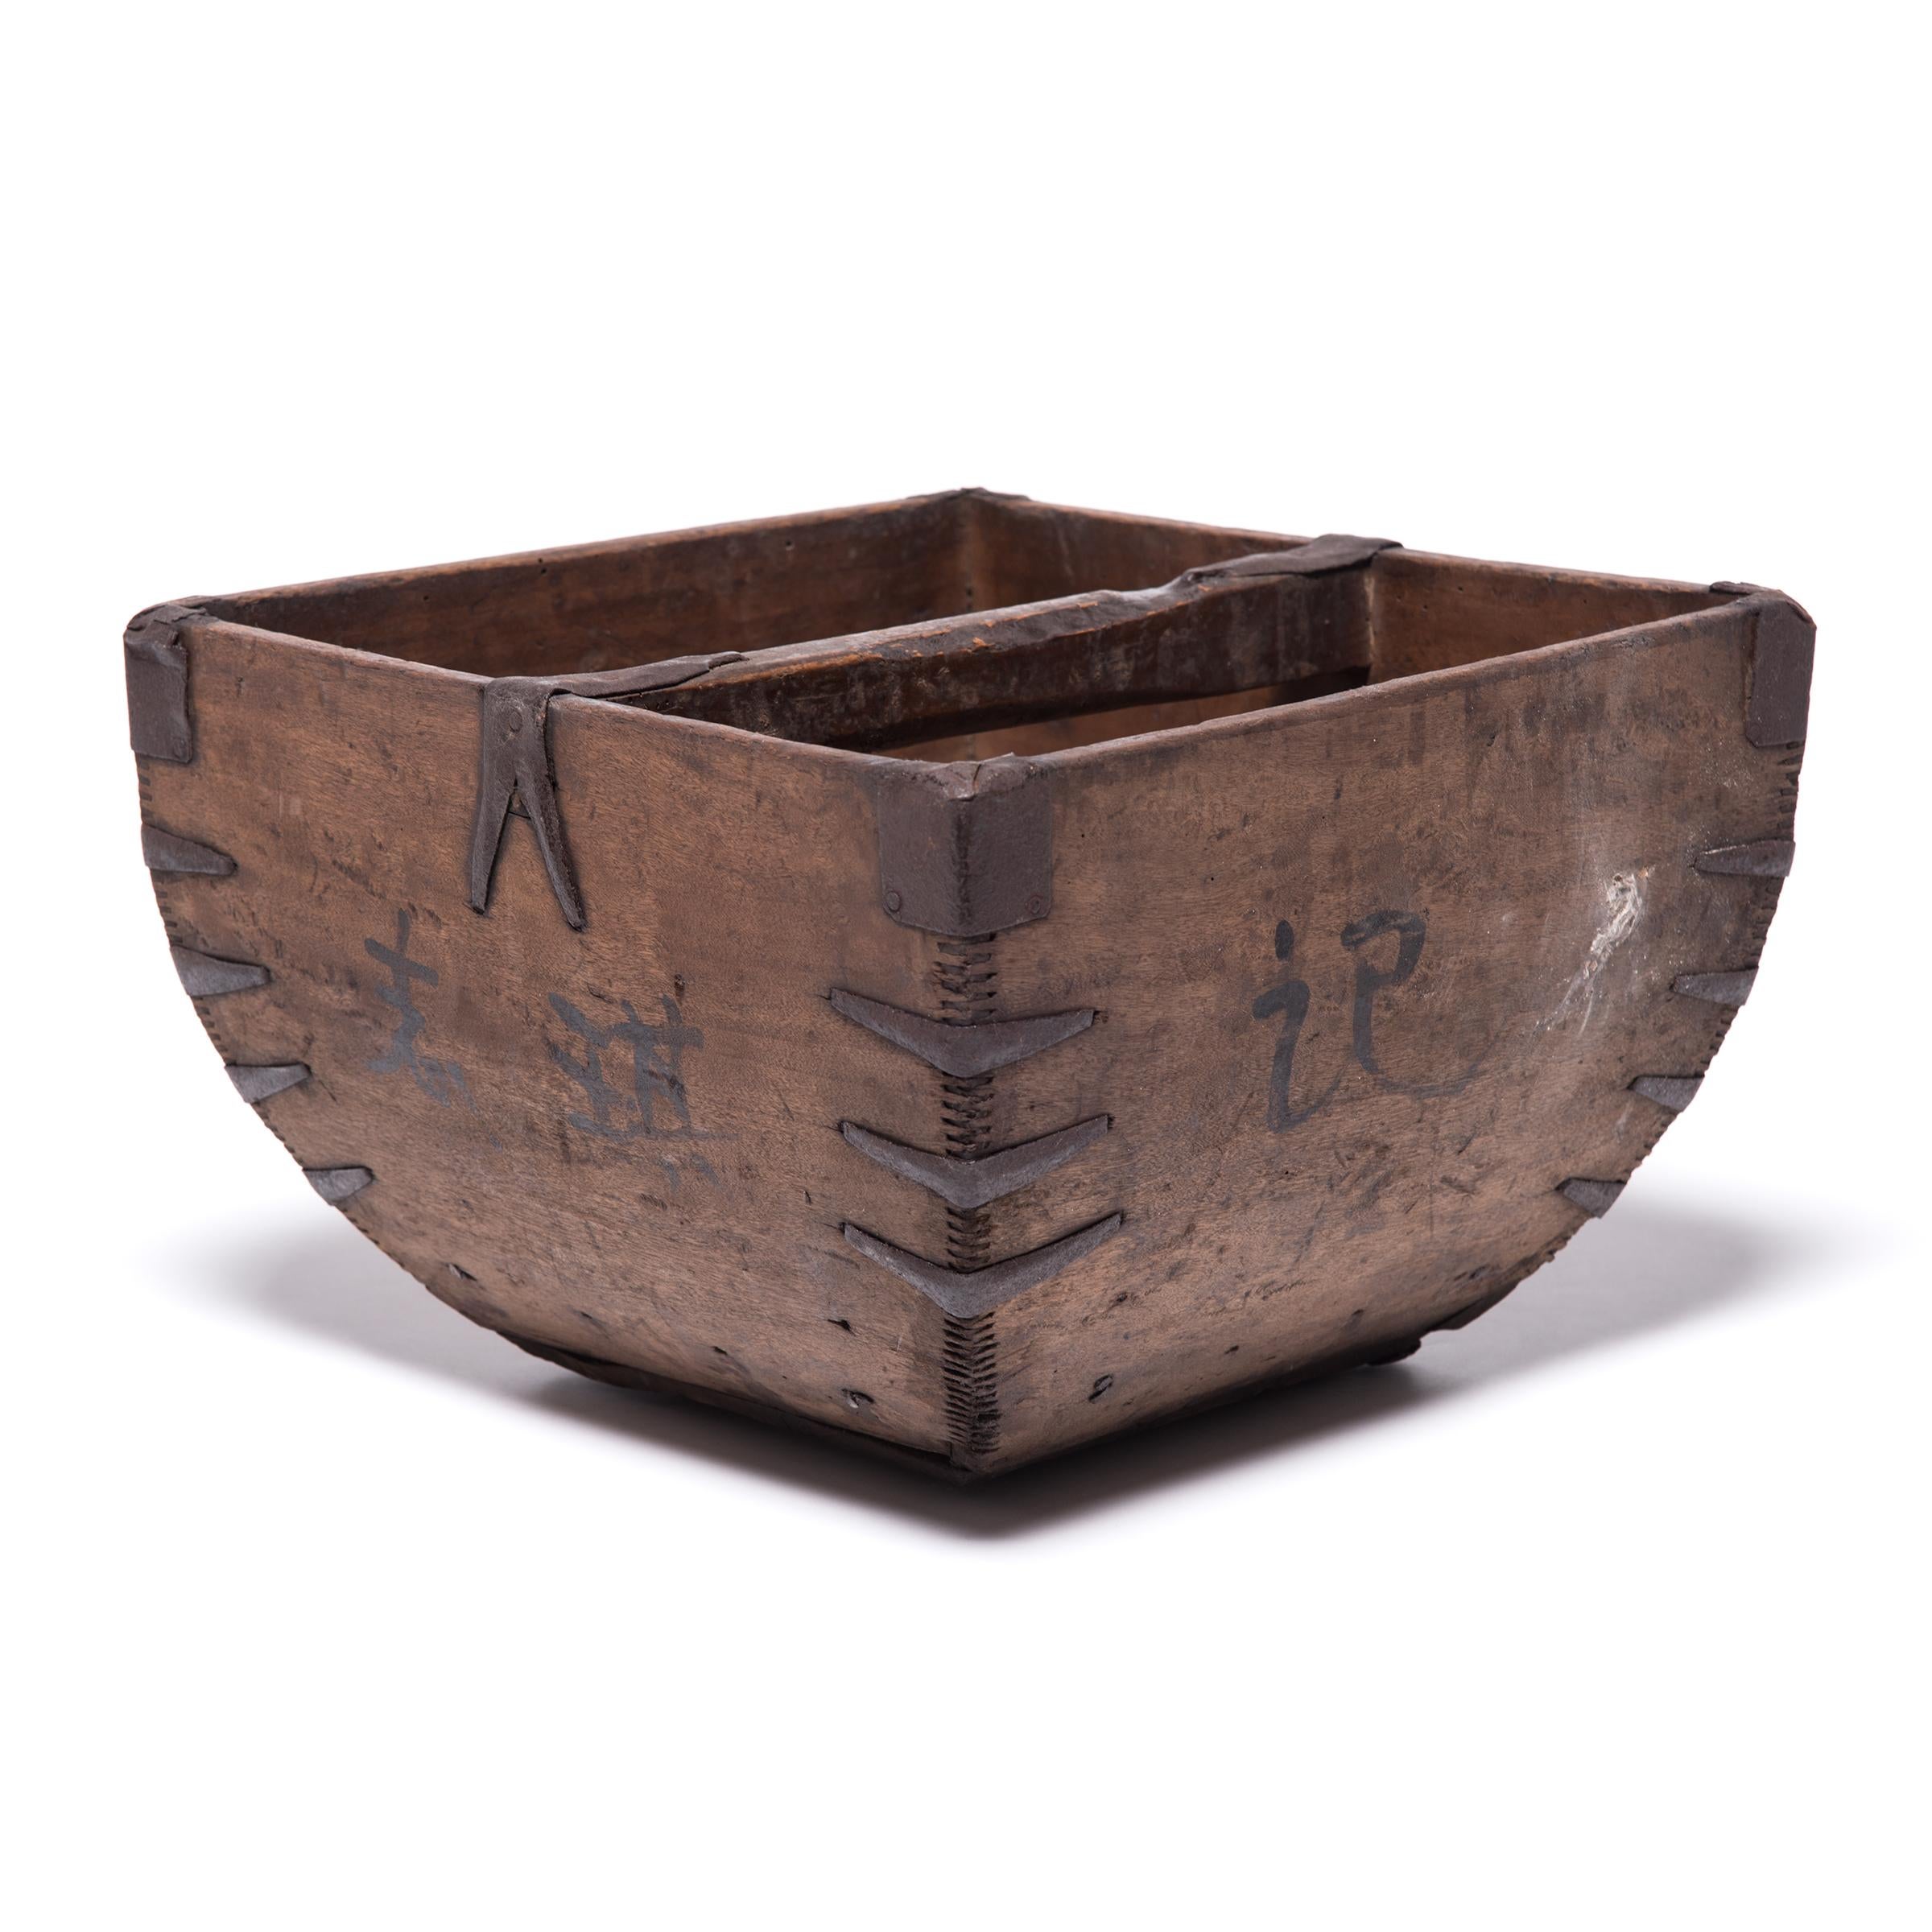 This square container was made over a hundred years ago to measure and hold a dou of rice, an ancient Chinese measurement. It is handcrafted with thin finger joints, iron-finished edges, and a gently arched handle. Marked by painted Chinese